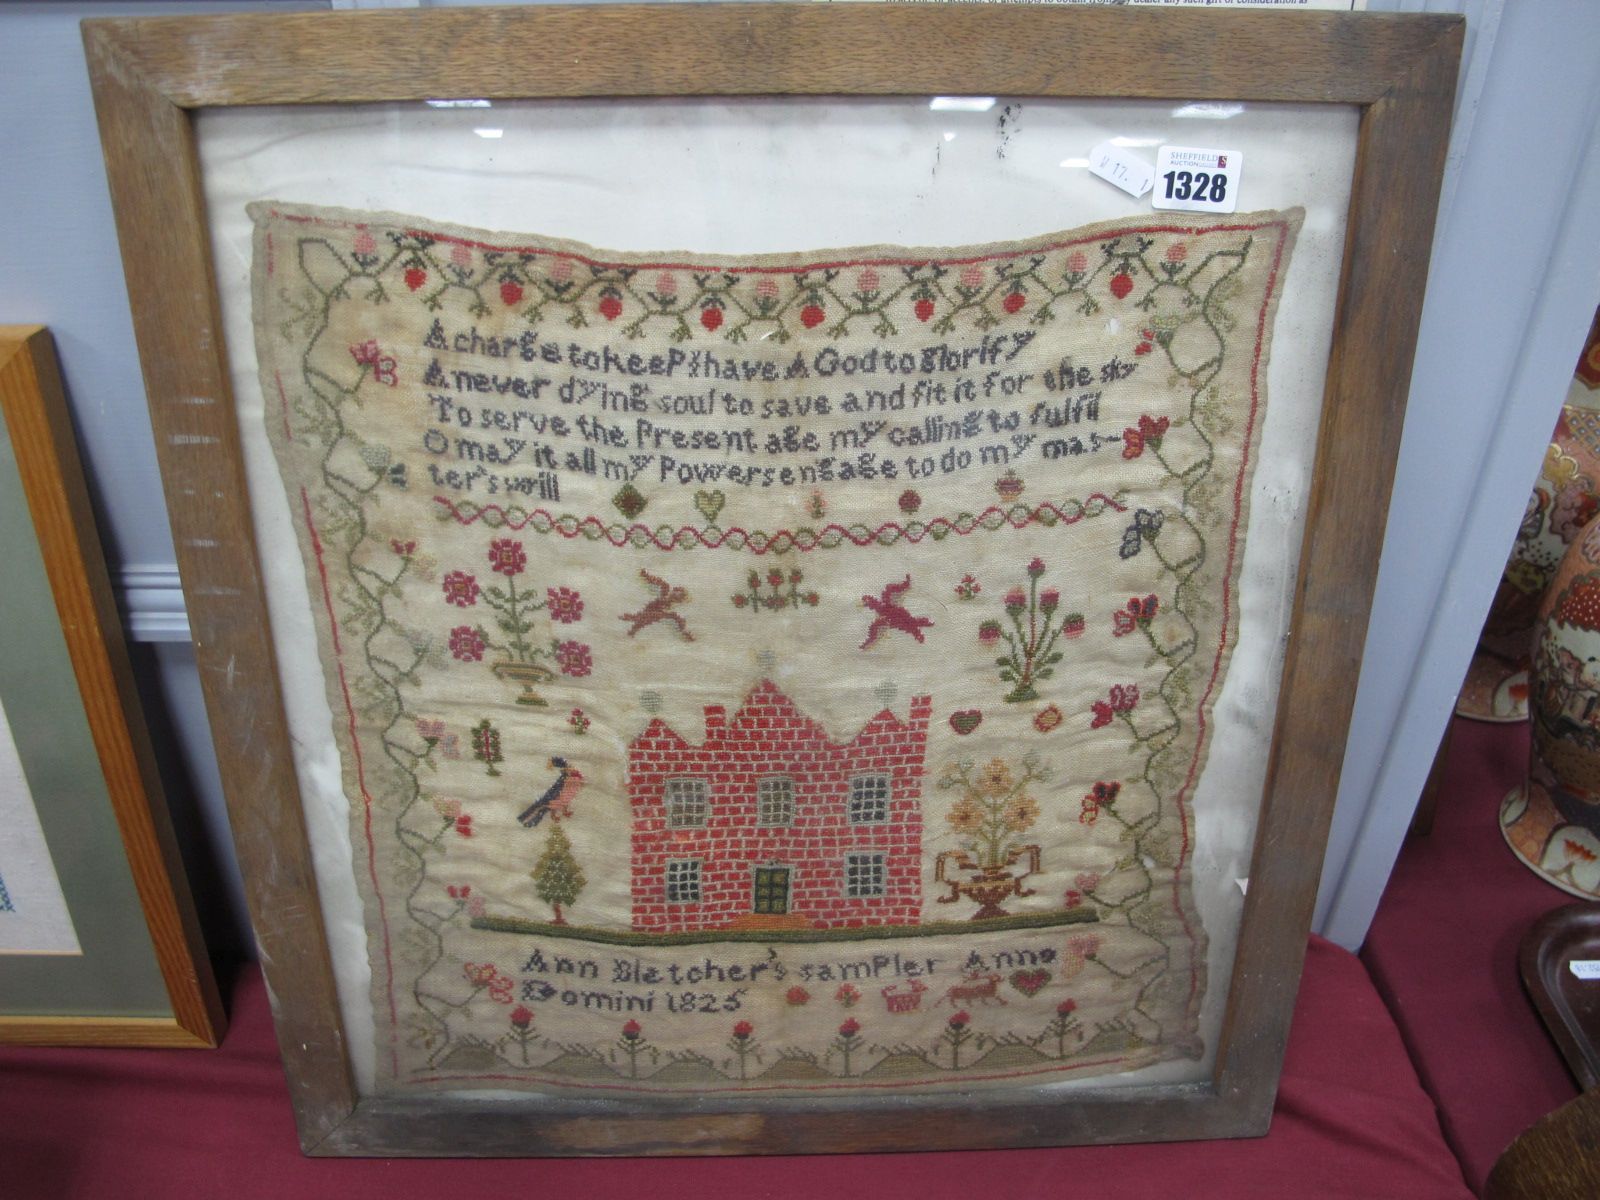 A Sampler by Ann Bletcher, 1825 hand worked with verse, birds, house and foliage, framed 18 x 40cm.